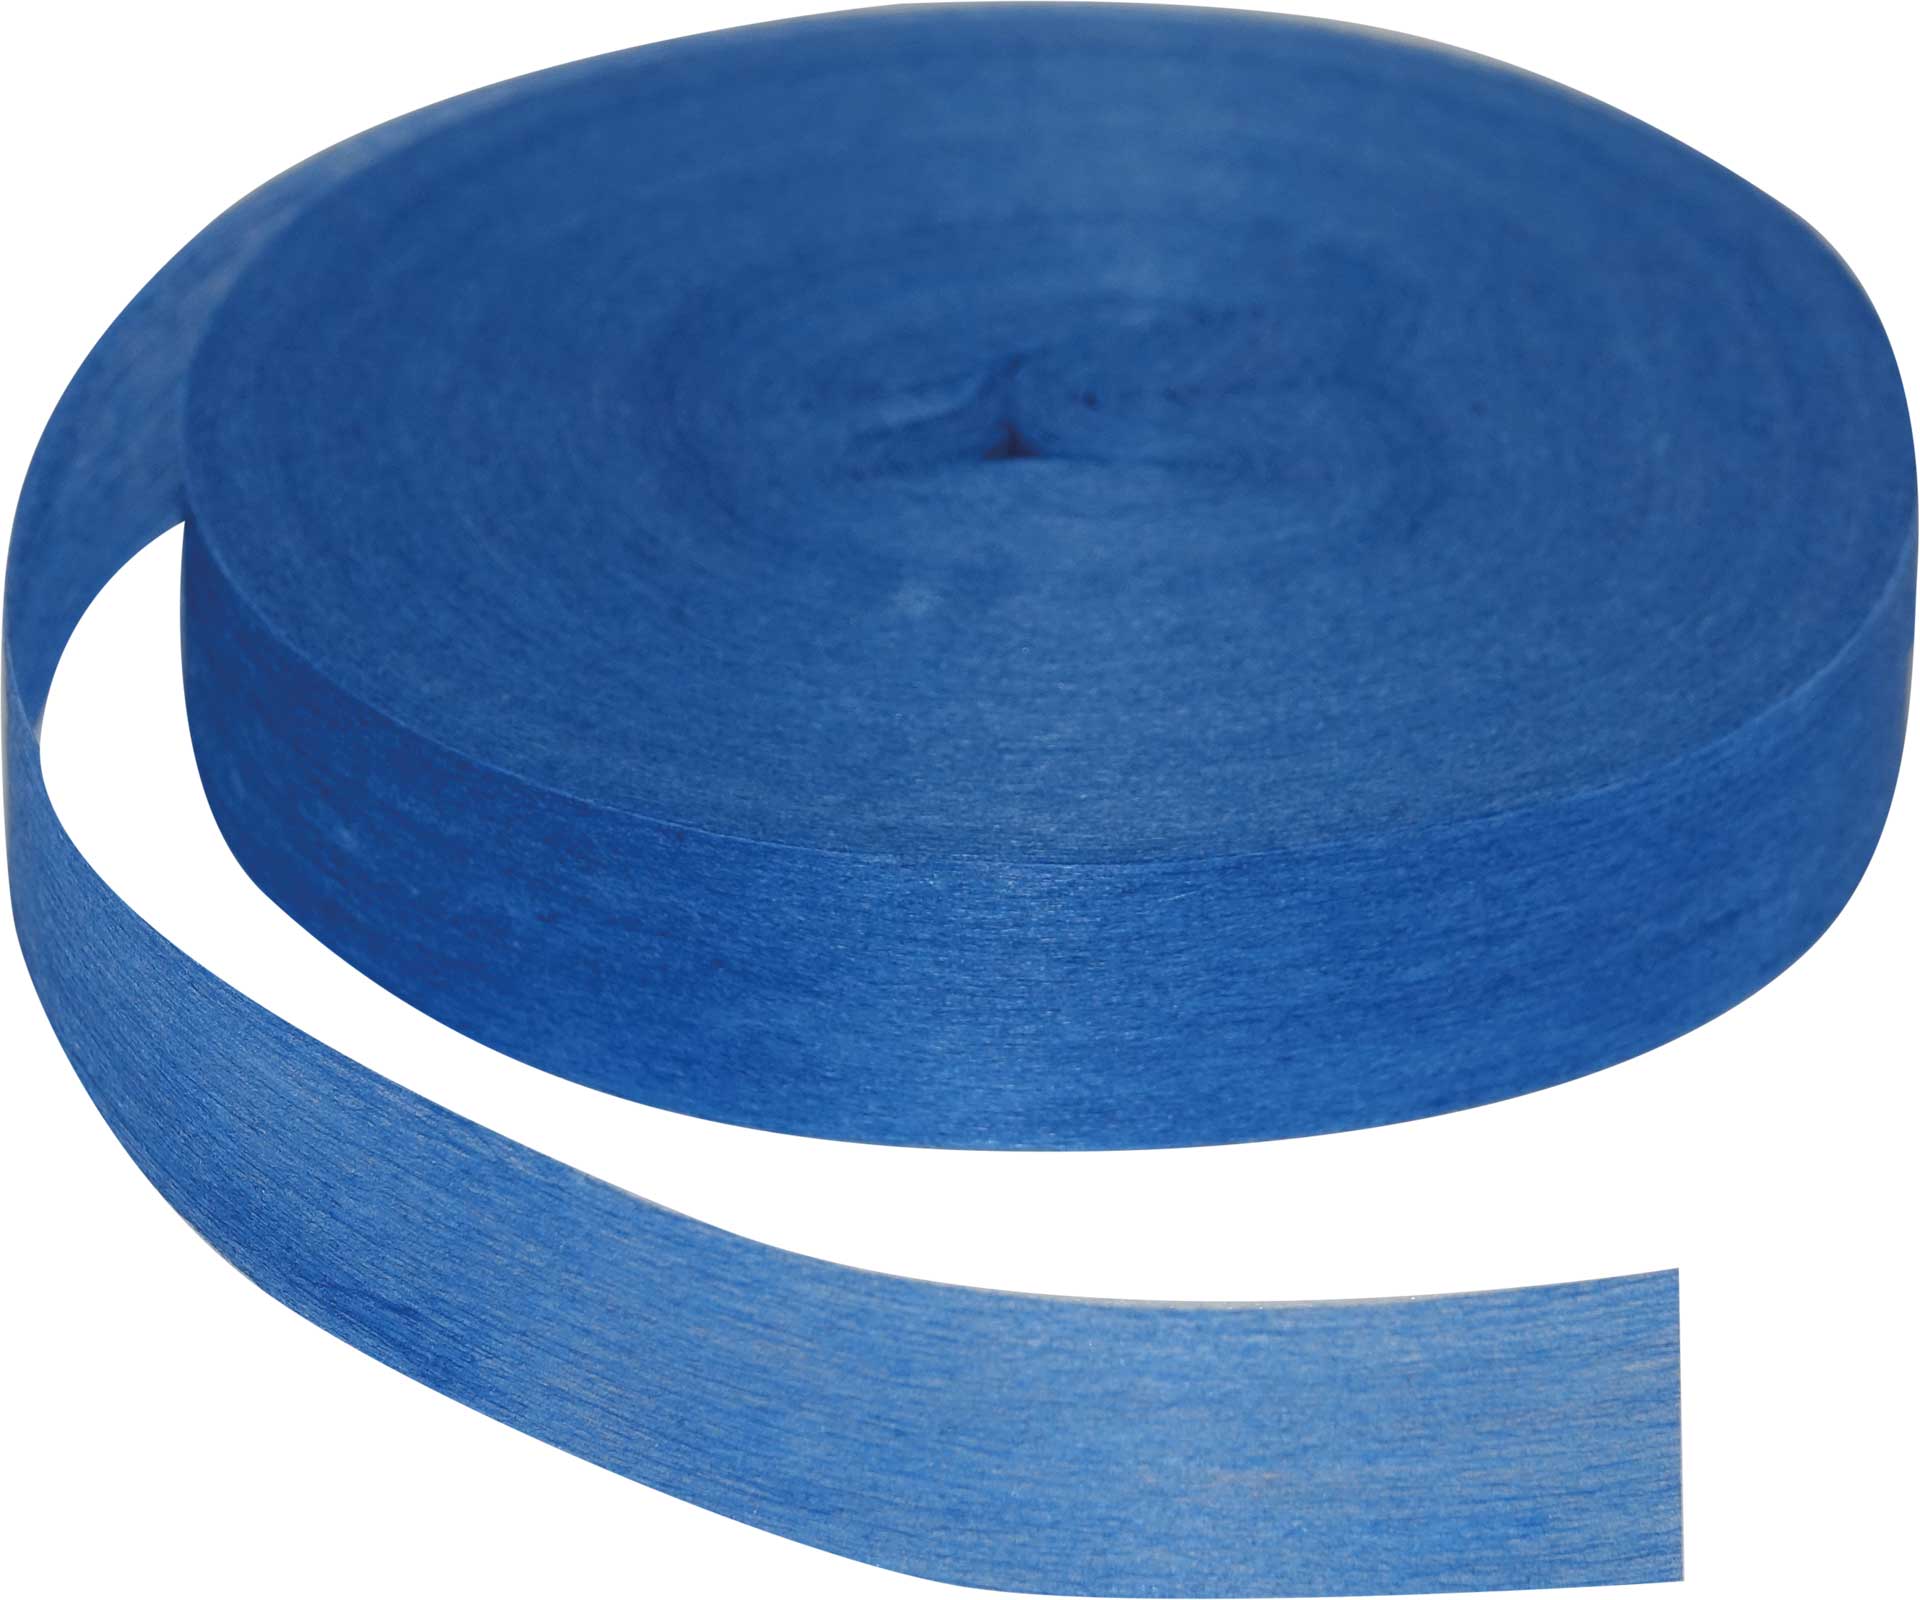 Robbe Modellsport Ribbons for Wingo 2 in the colors blue approx. 75m